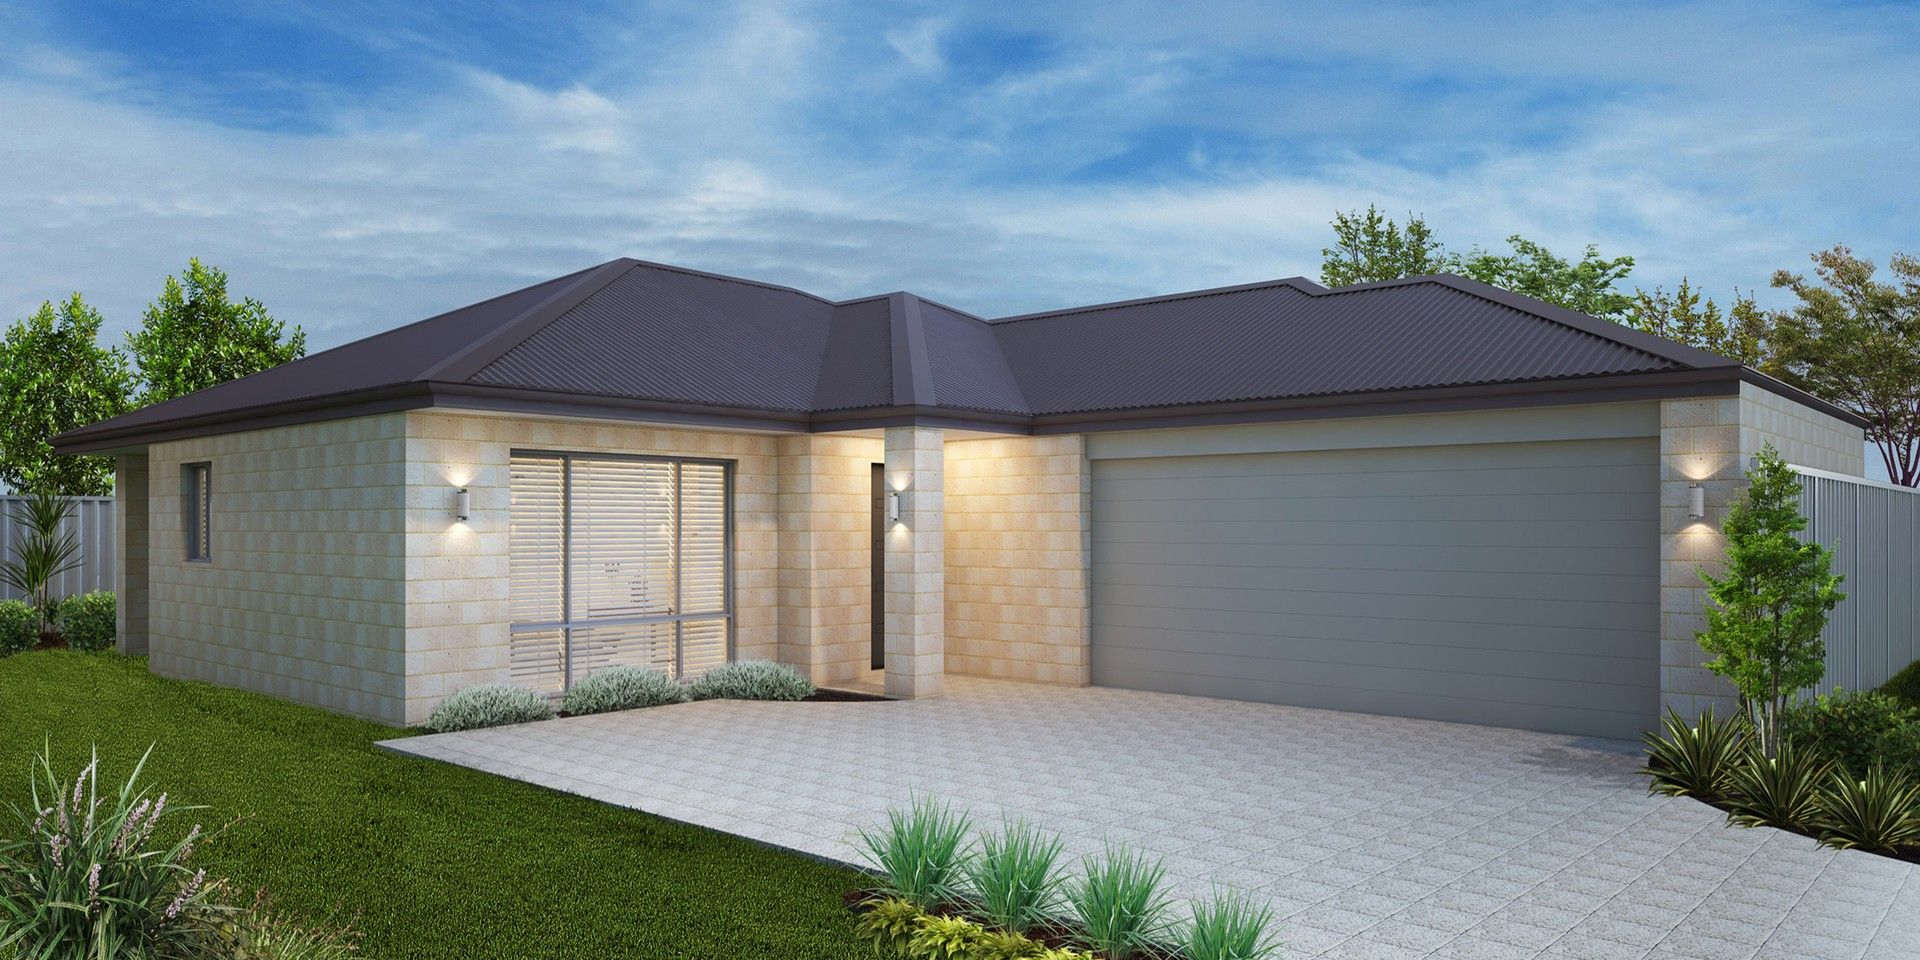 3 bedrooms New House & Land in Lot 1/165a Eddystone Ave CRAIGIE WA, 6025